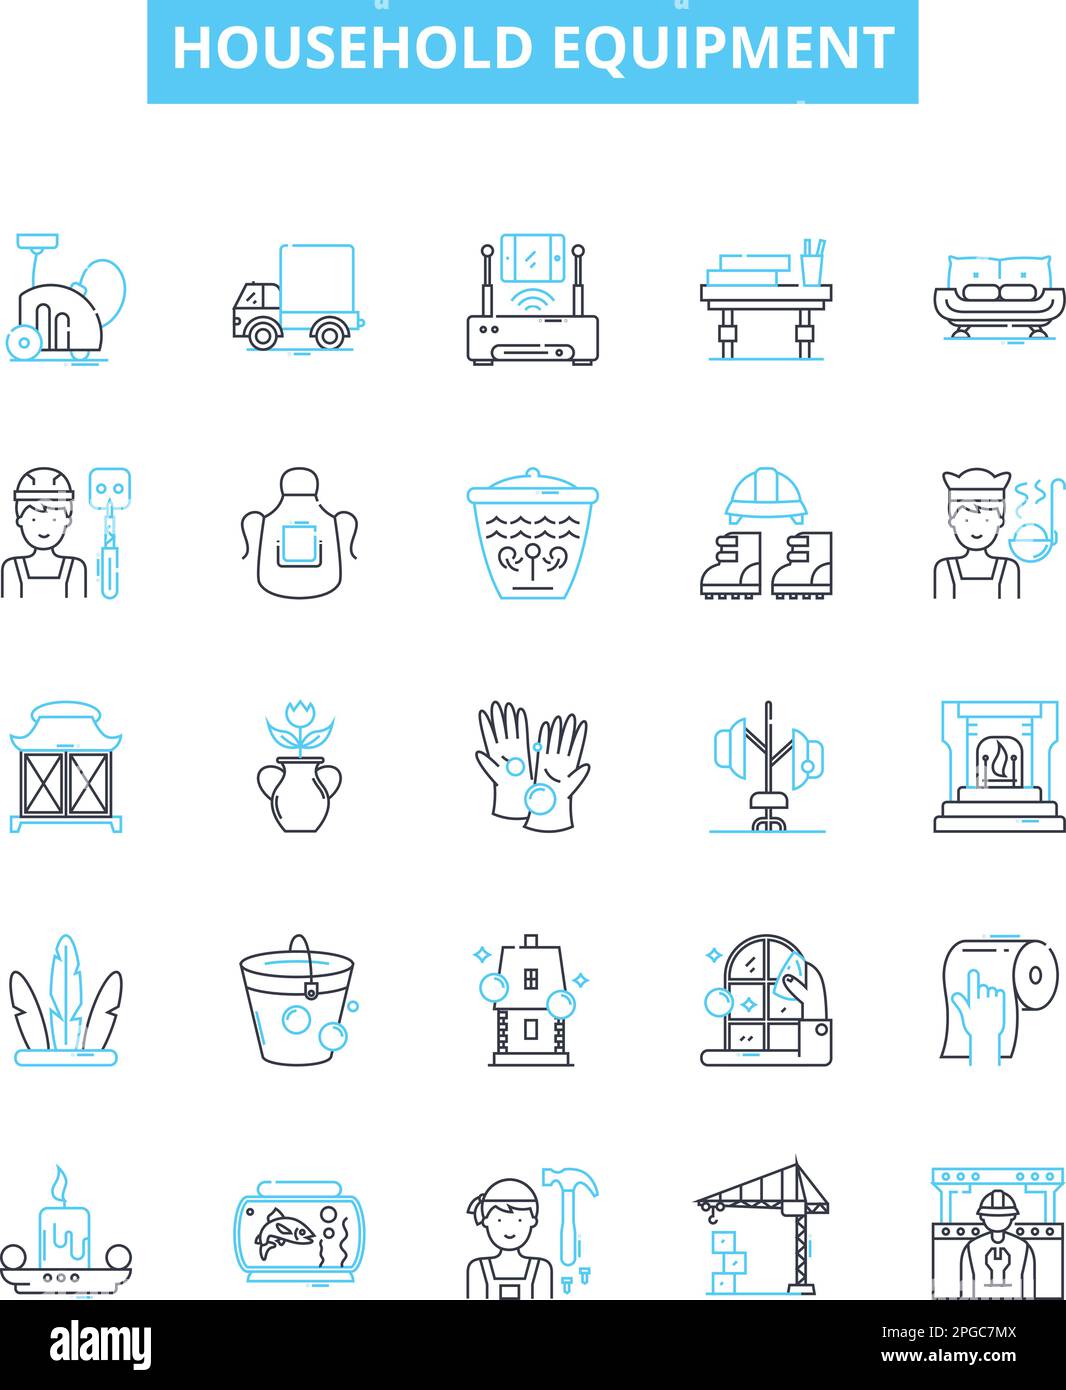 Kitchen appliances and dishware vector icons set Stock Vector by